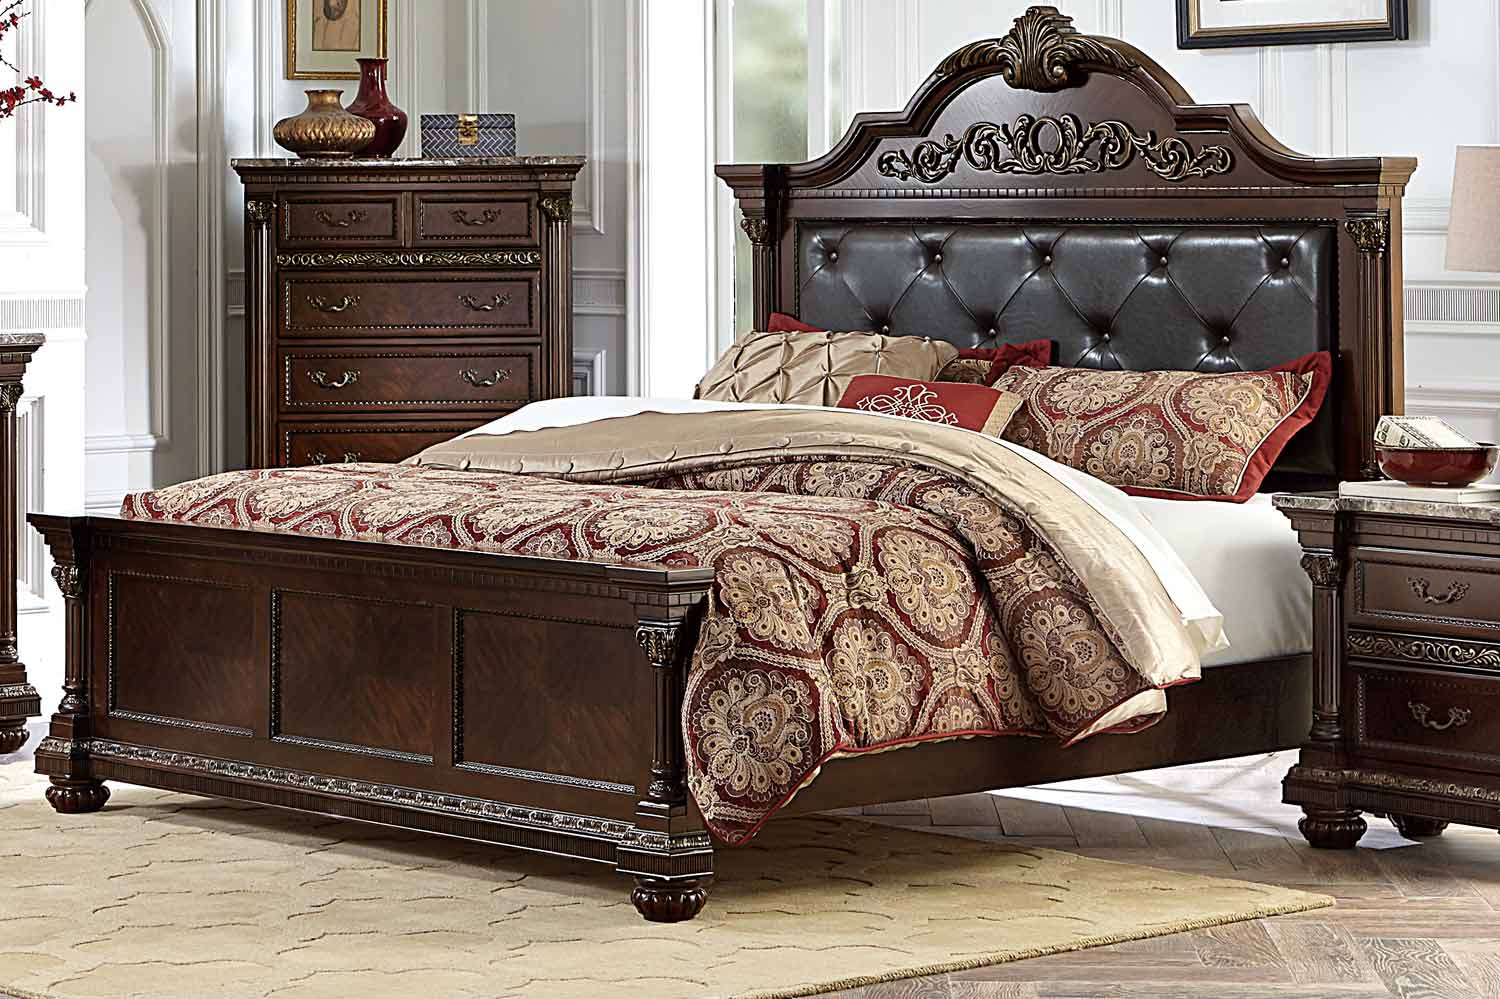 Homelegance Russian Hill Upholstered Bed - Warm Cherry